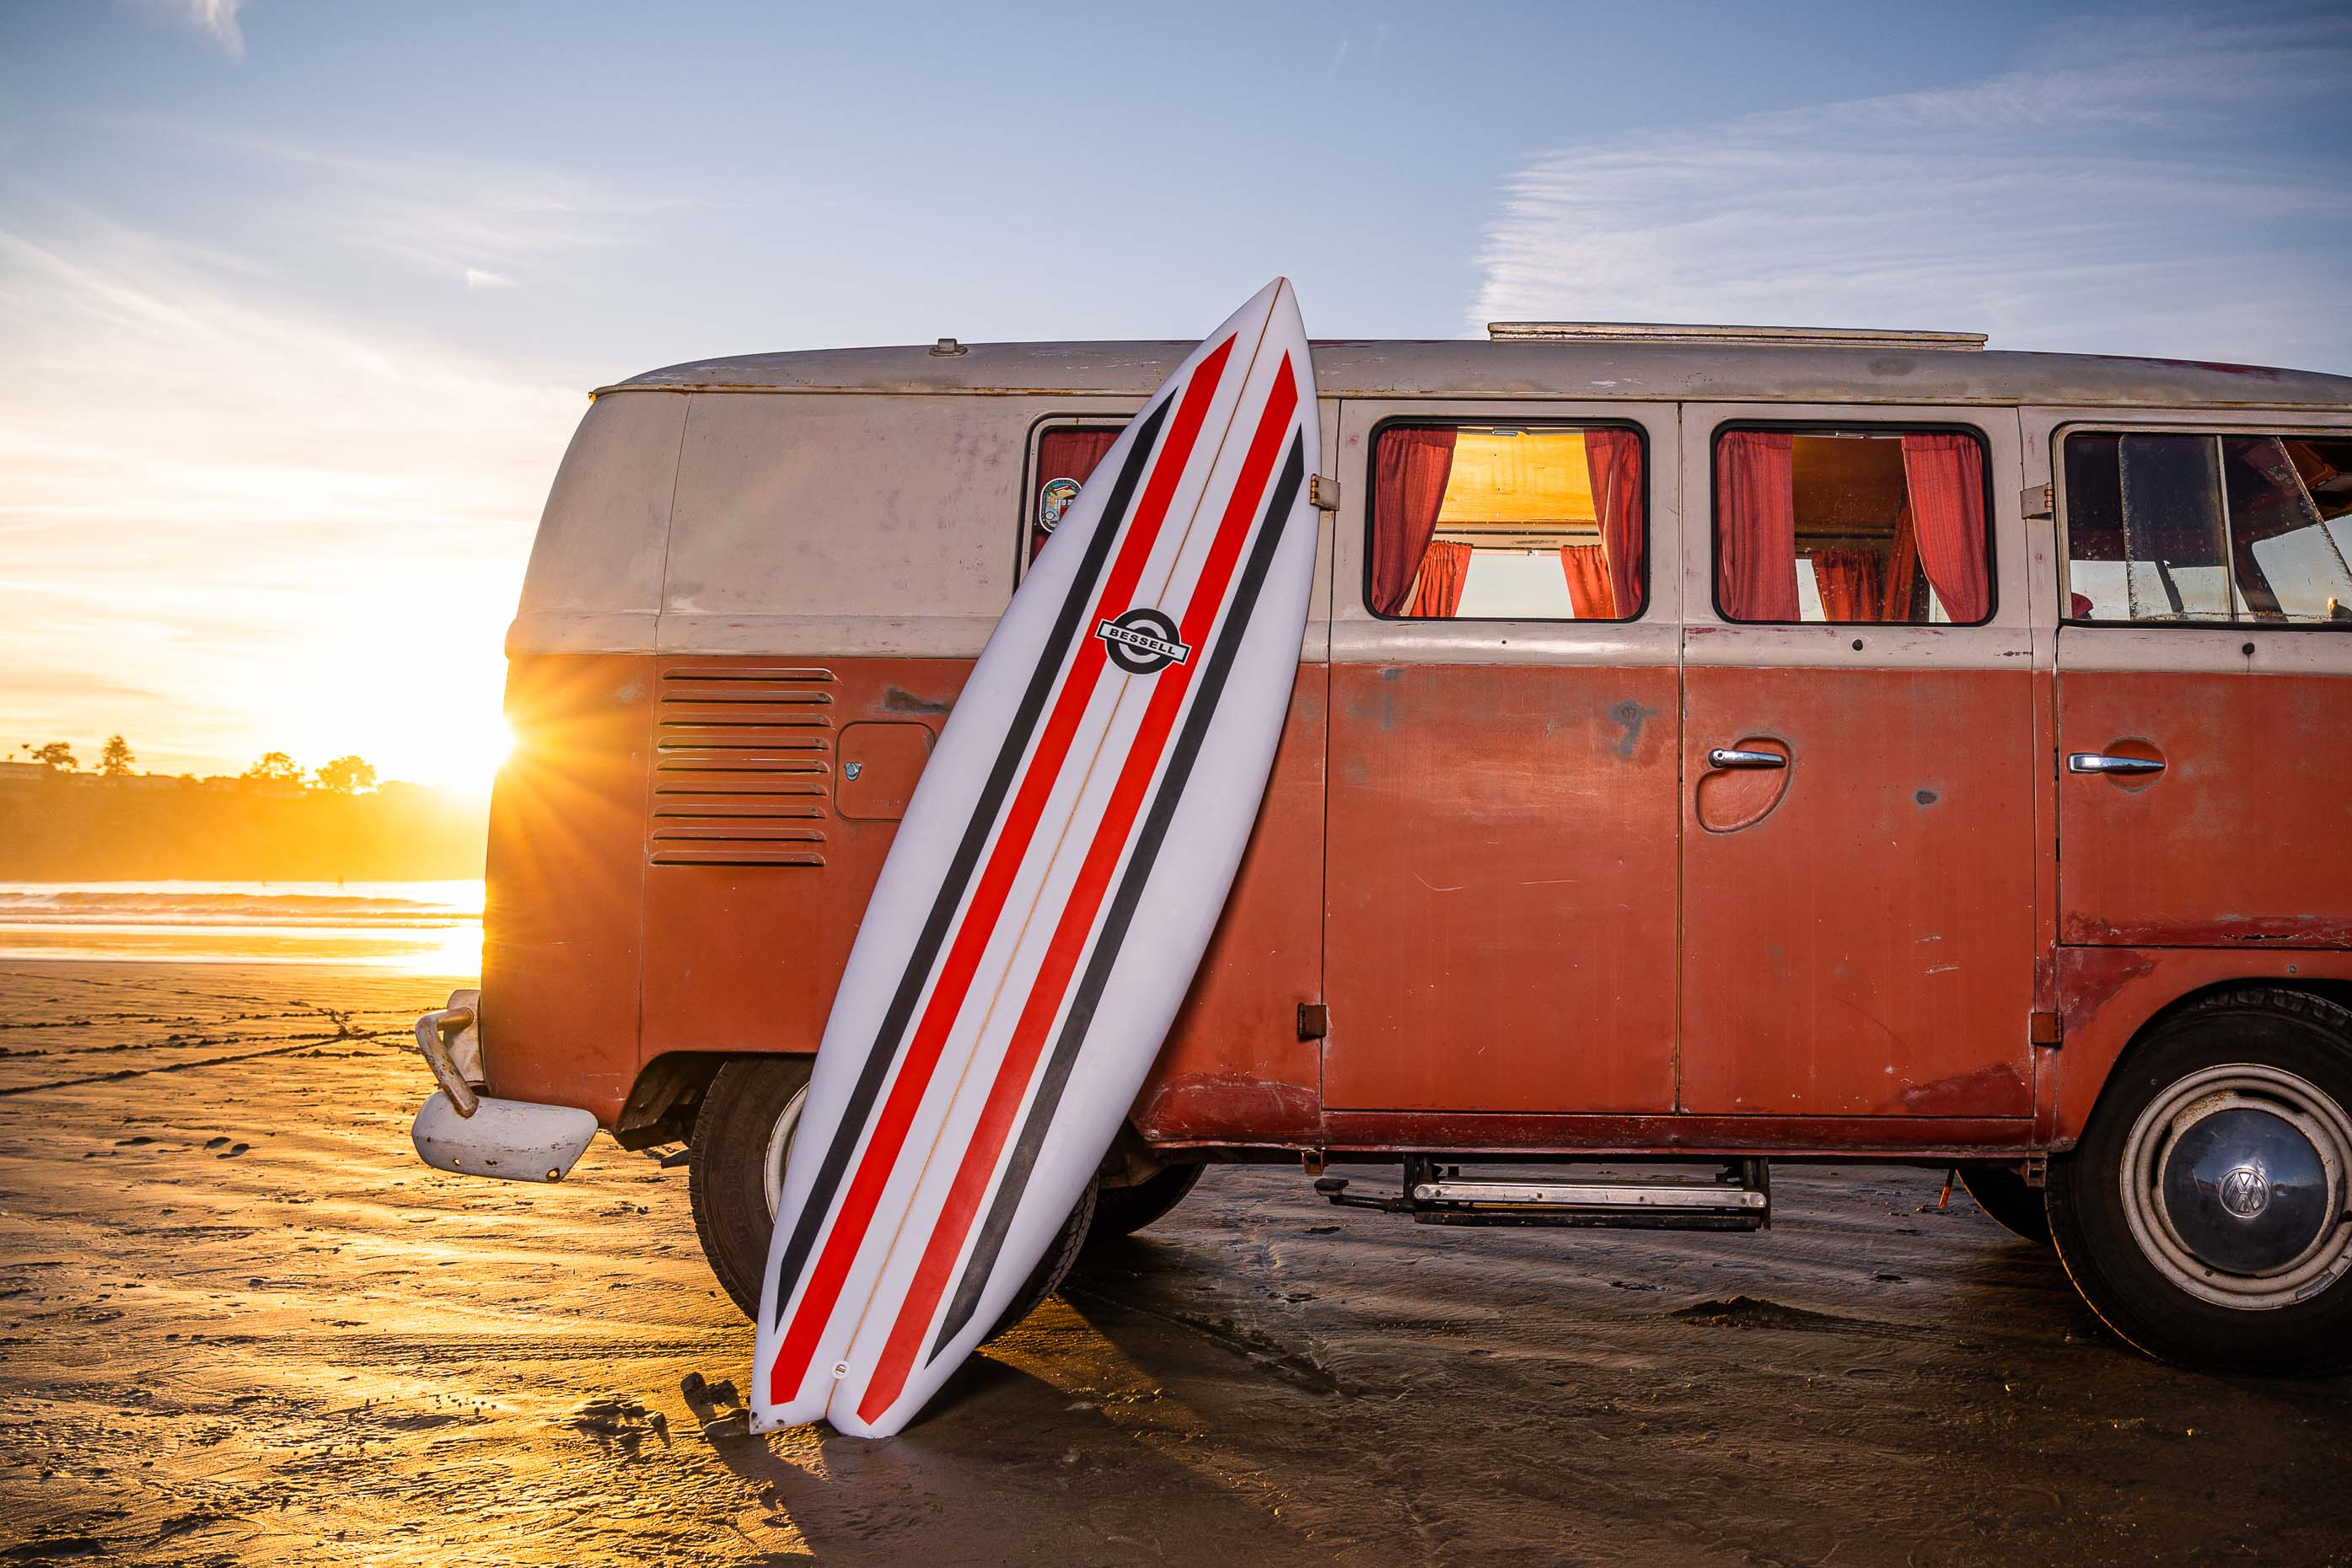 aaron-ingrao-keepers-of-the-craft-tim-bessell-surfboards-san-diego-1959-westfalia-volkswagon-SO23-VW-Bus-6930